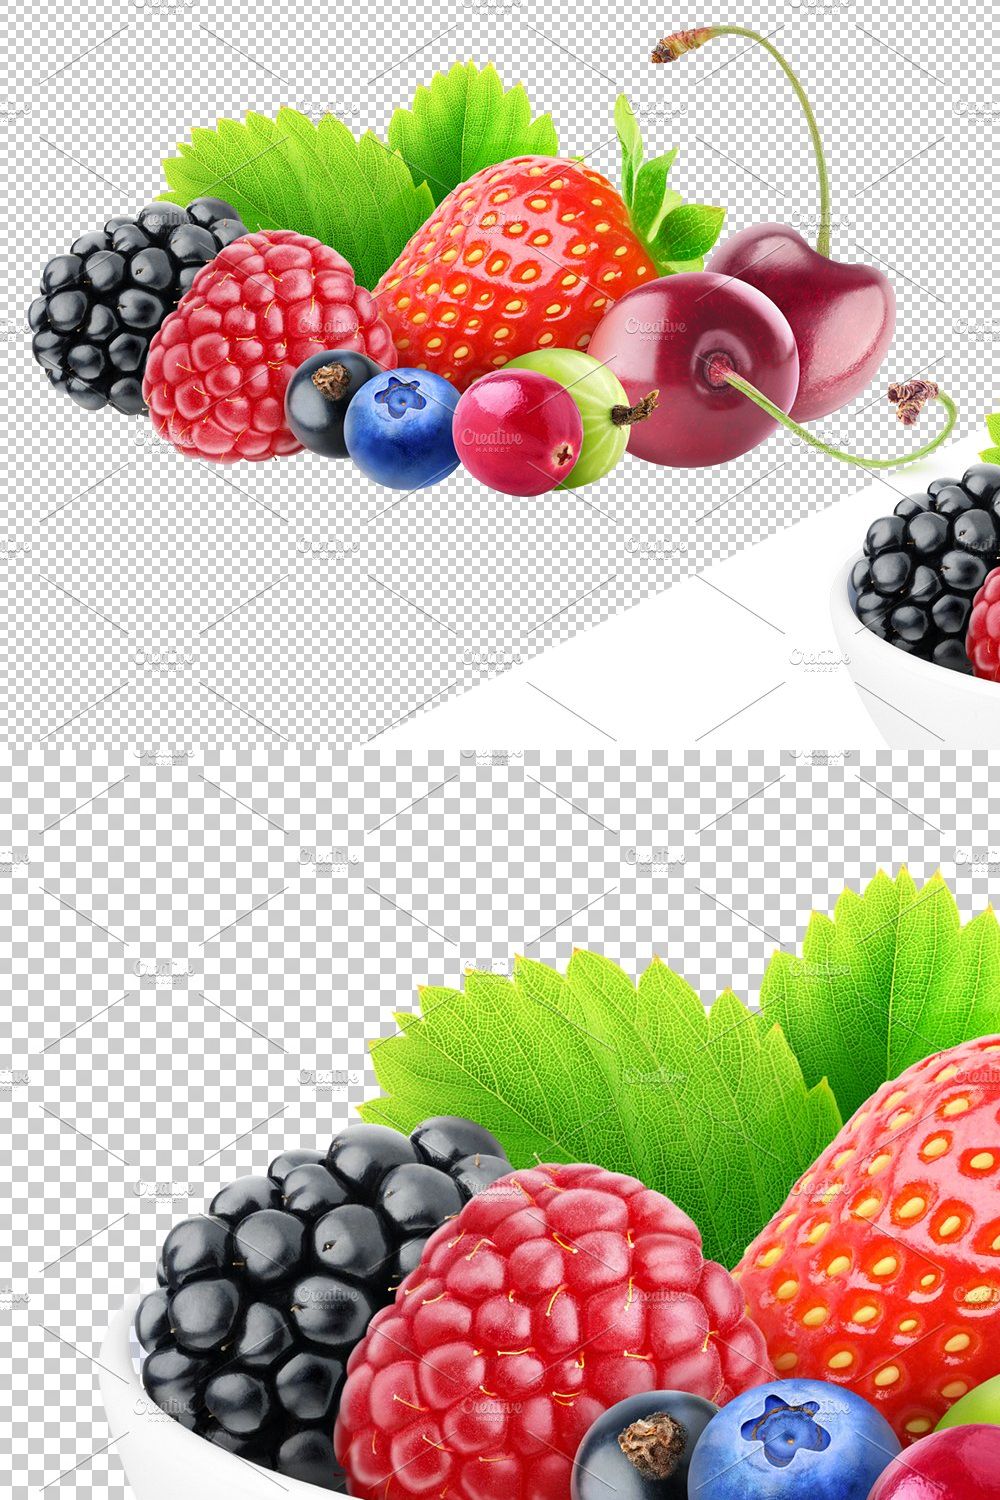 Pile of berries pinterest preview image.